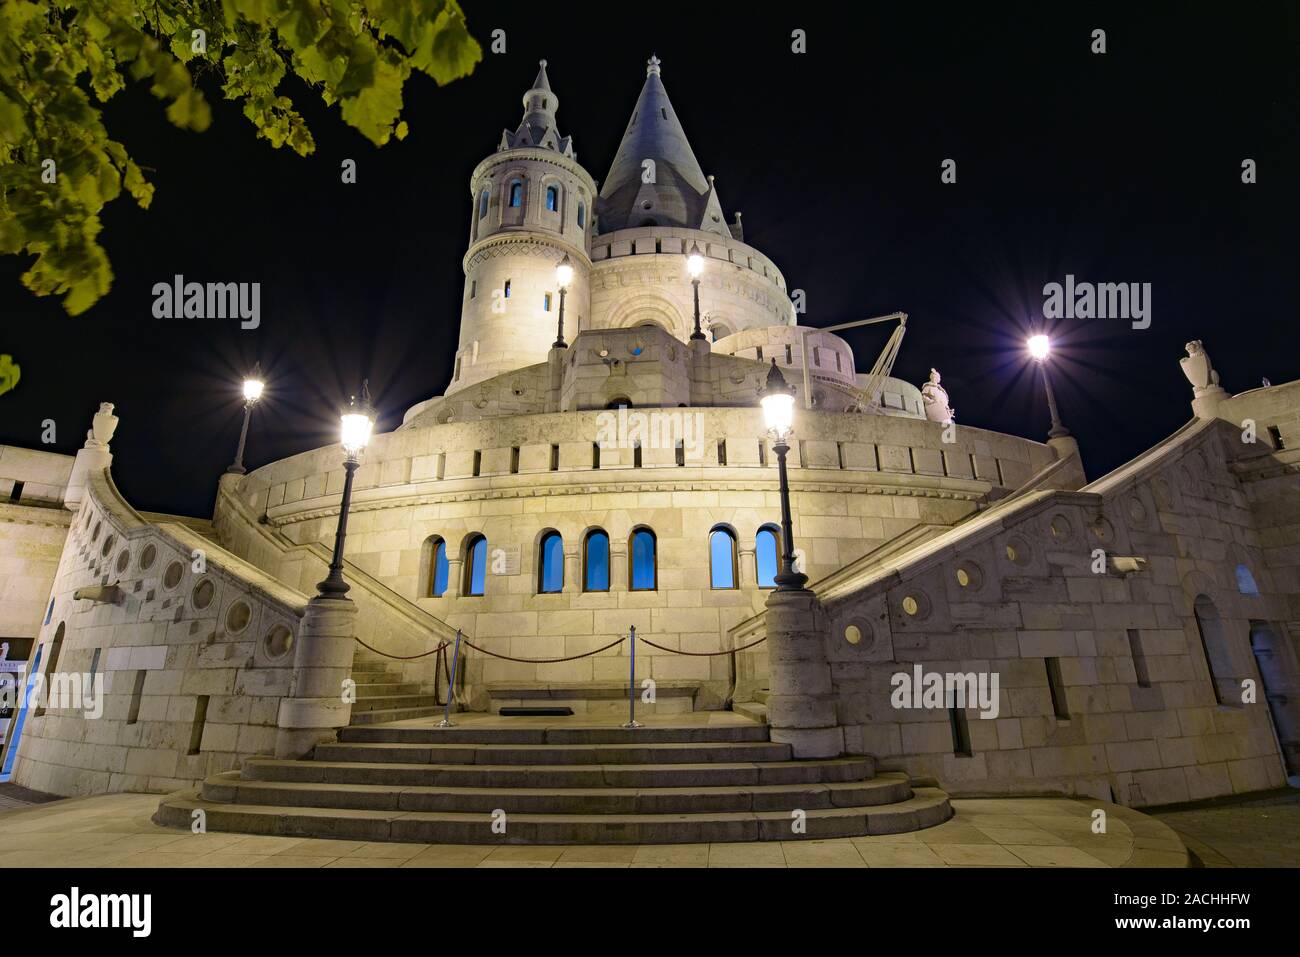 Night view of Fisherman's Bastion, one of the best known monuments in Budapest in the Buda Castle District, Hungary Stock Photo